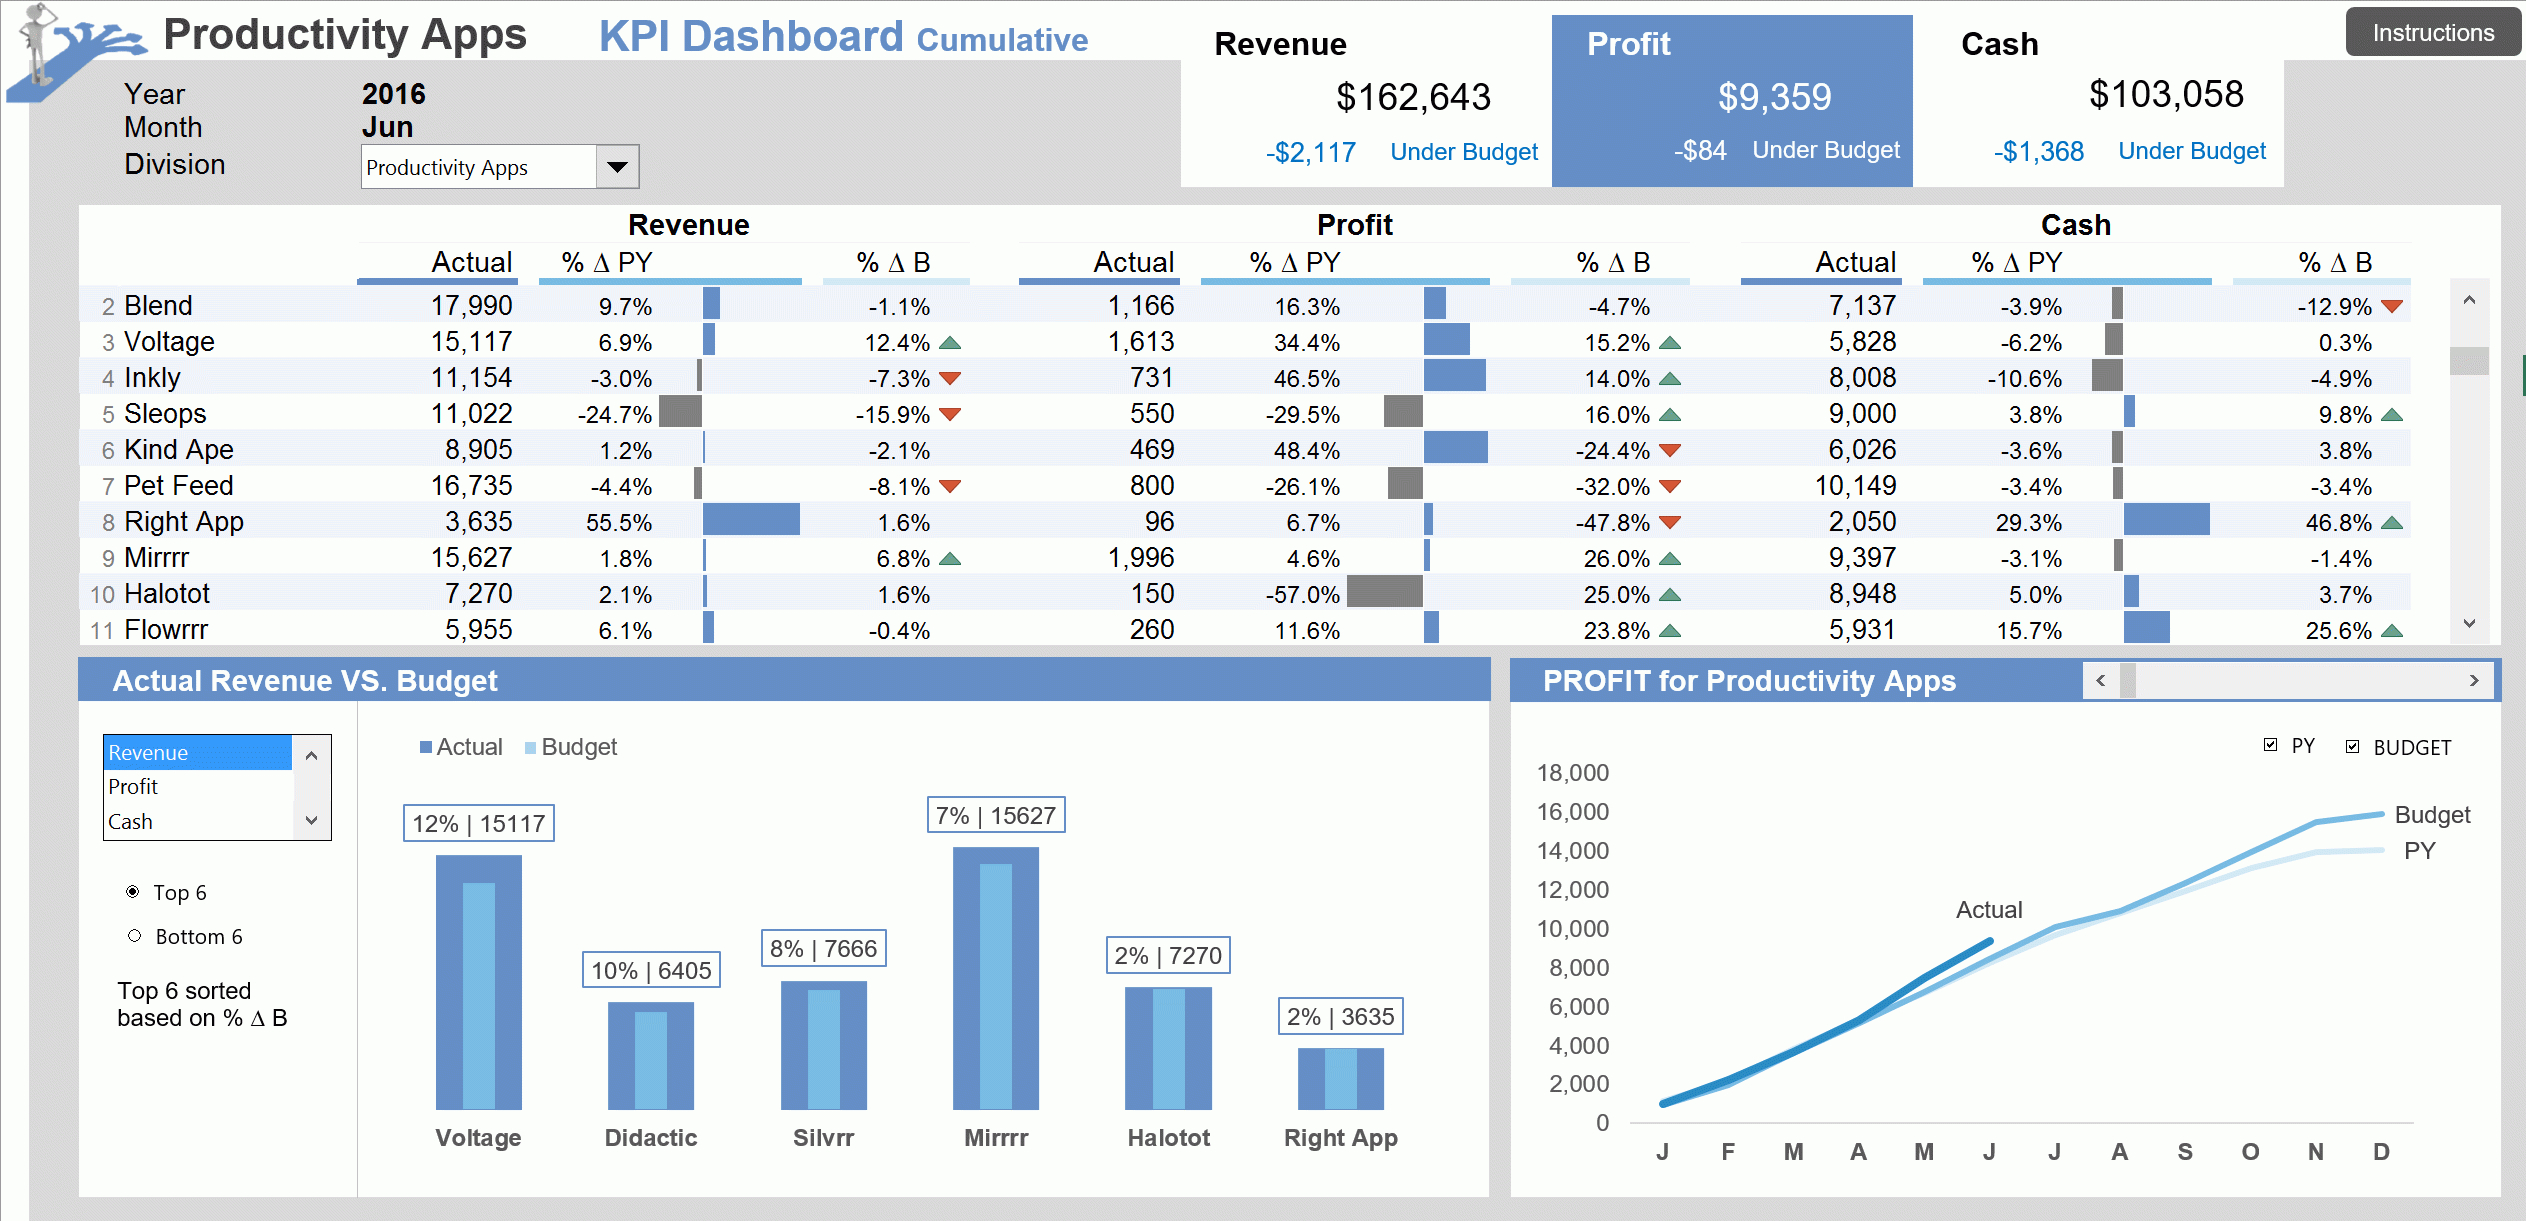 5 Design Tips For Better Excel Dashboards - Xelplus - Leila Gharani throughout Create A Kpi Dashboard In Excel